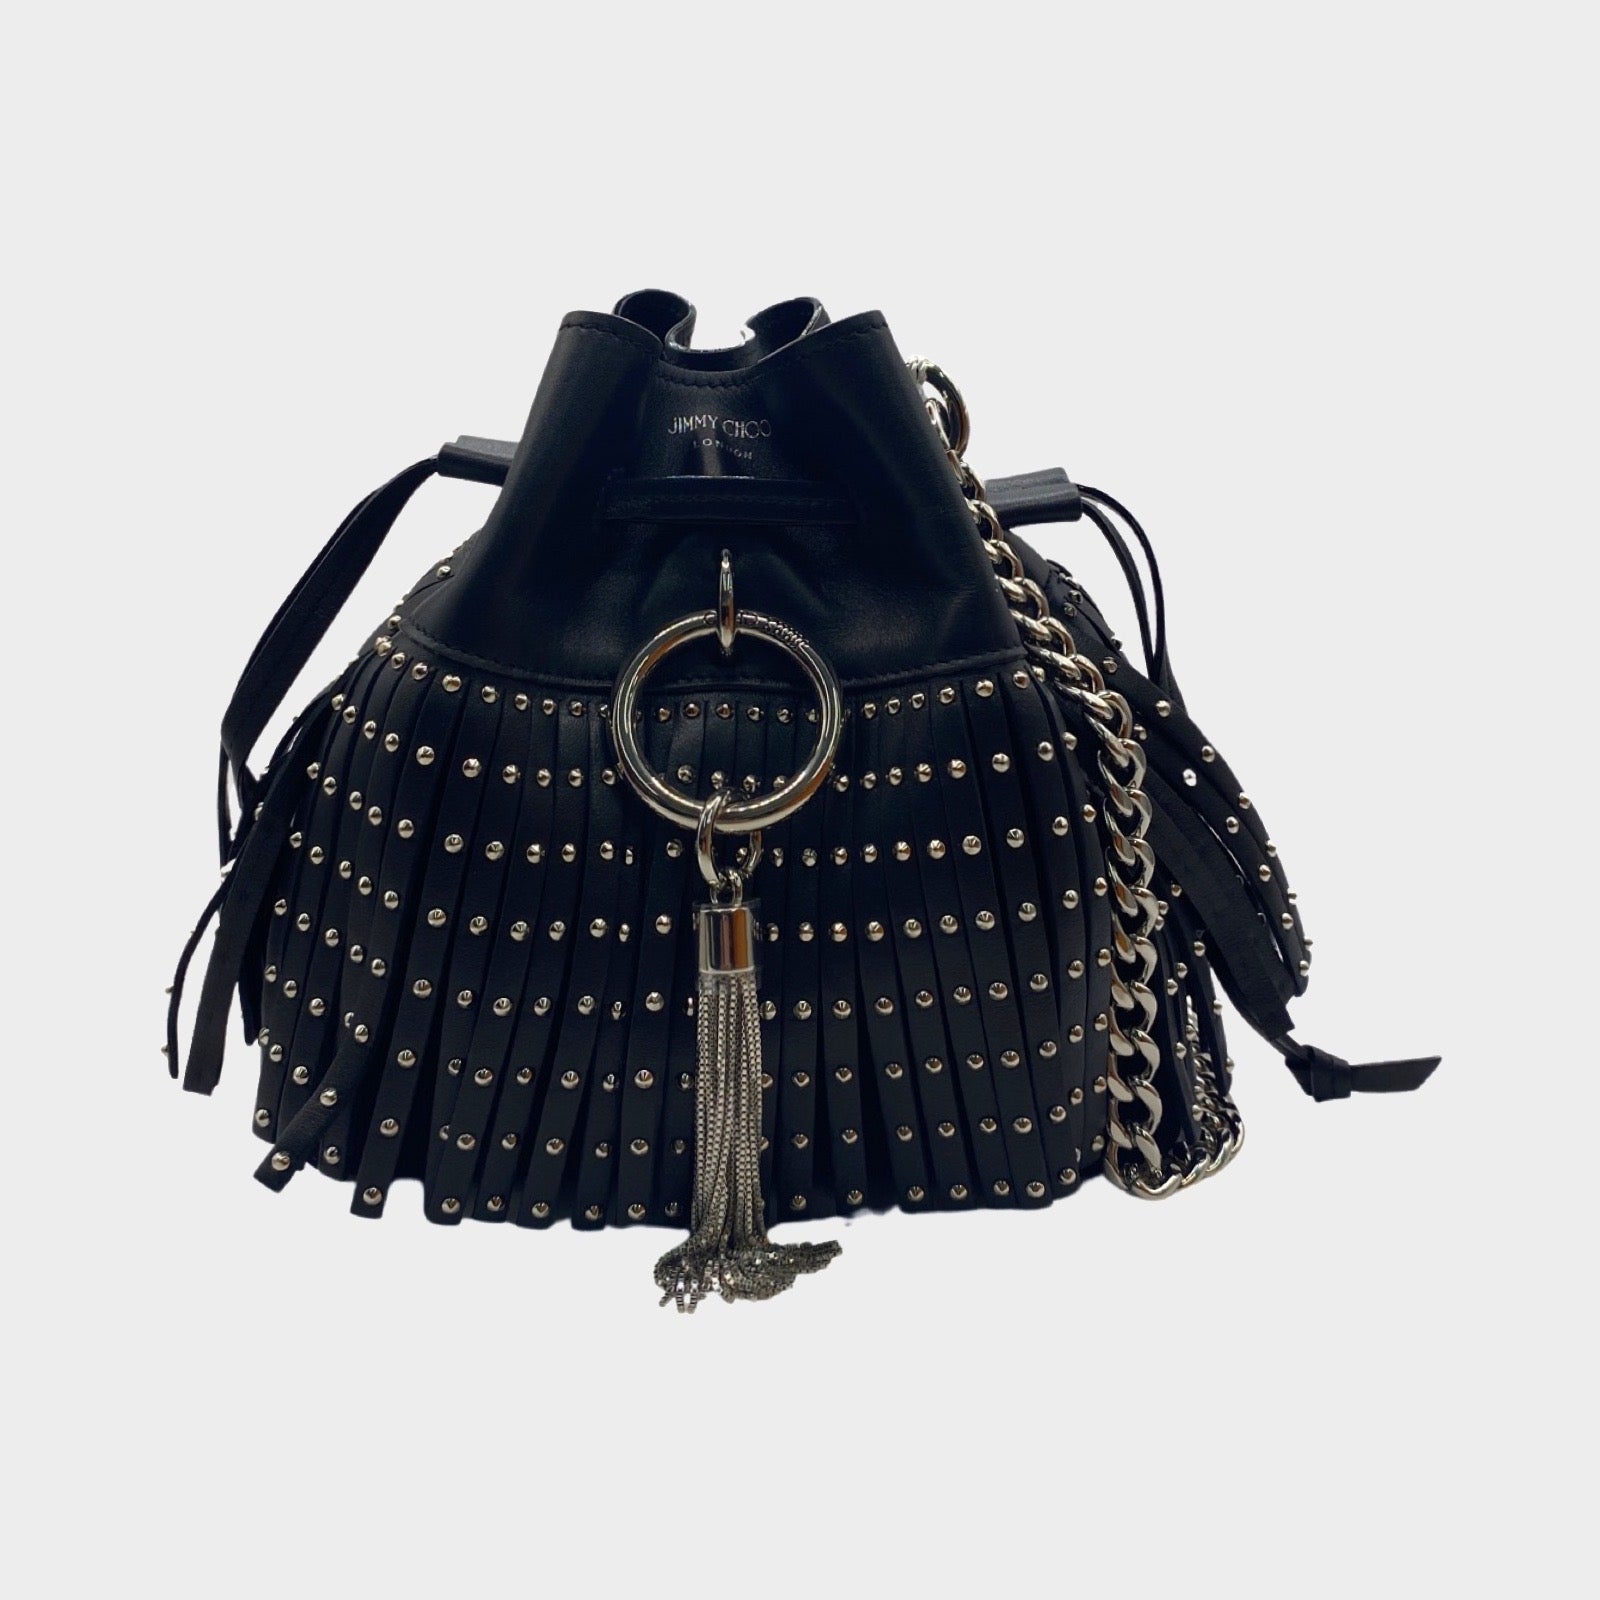 Love Moschino Black Eco- Leather Studded Tote Bag at FORZIERI